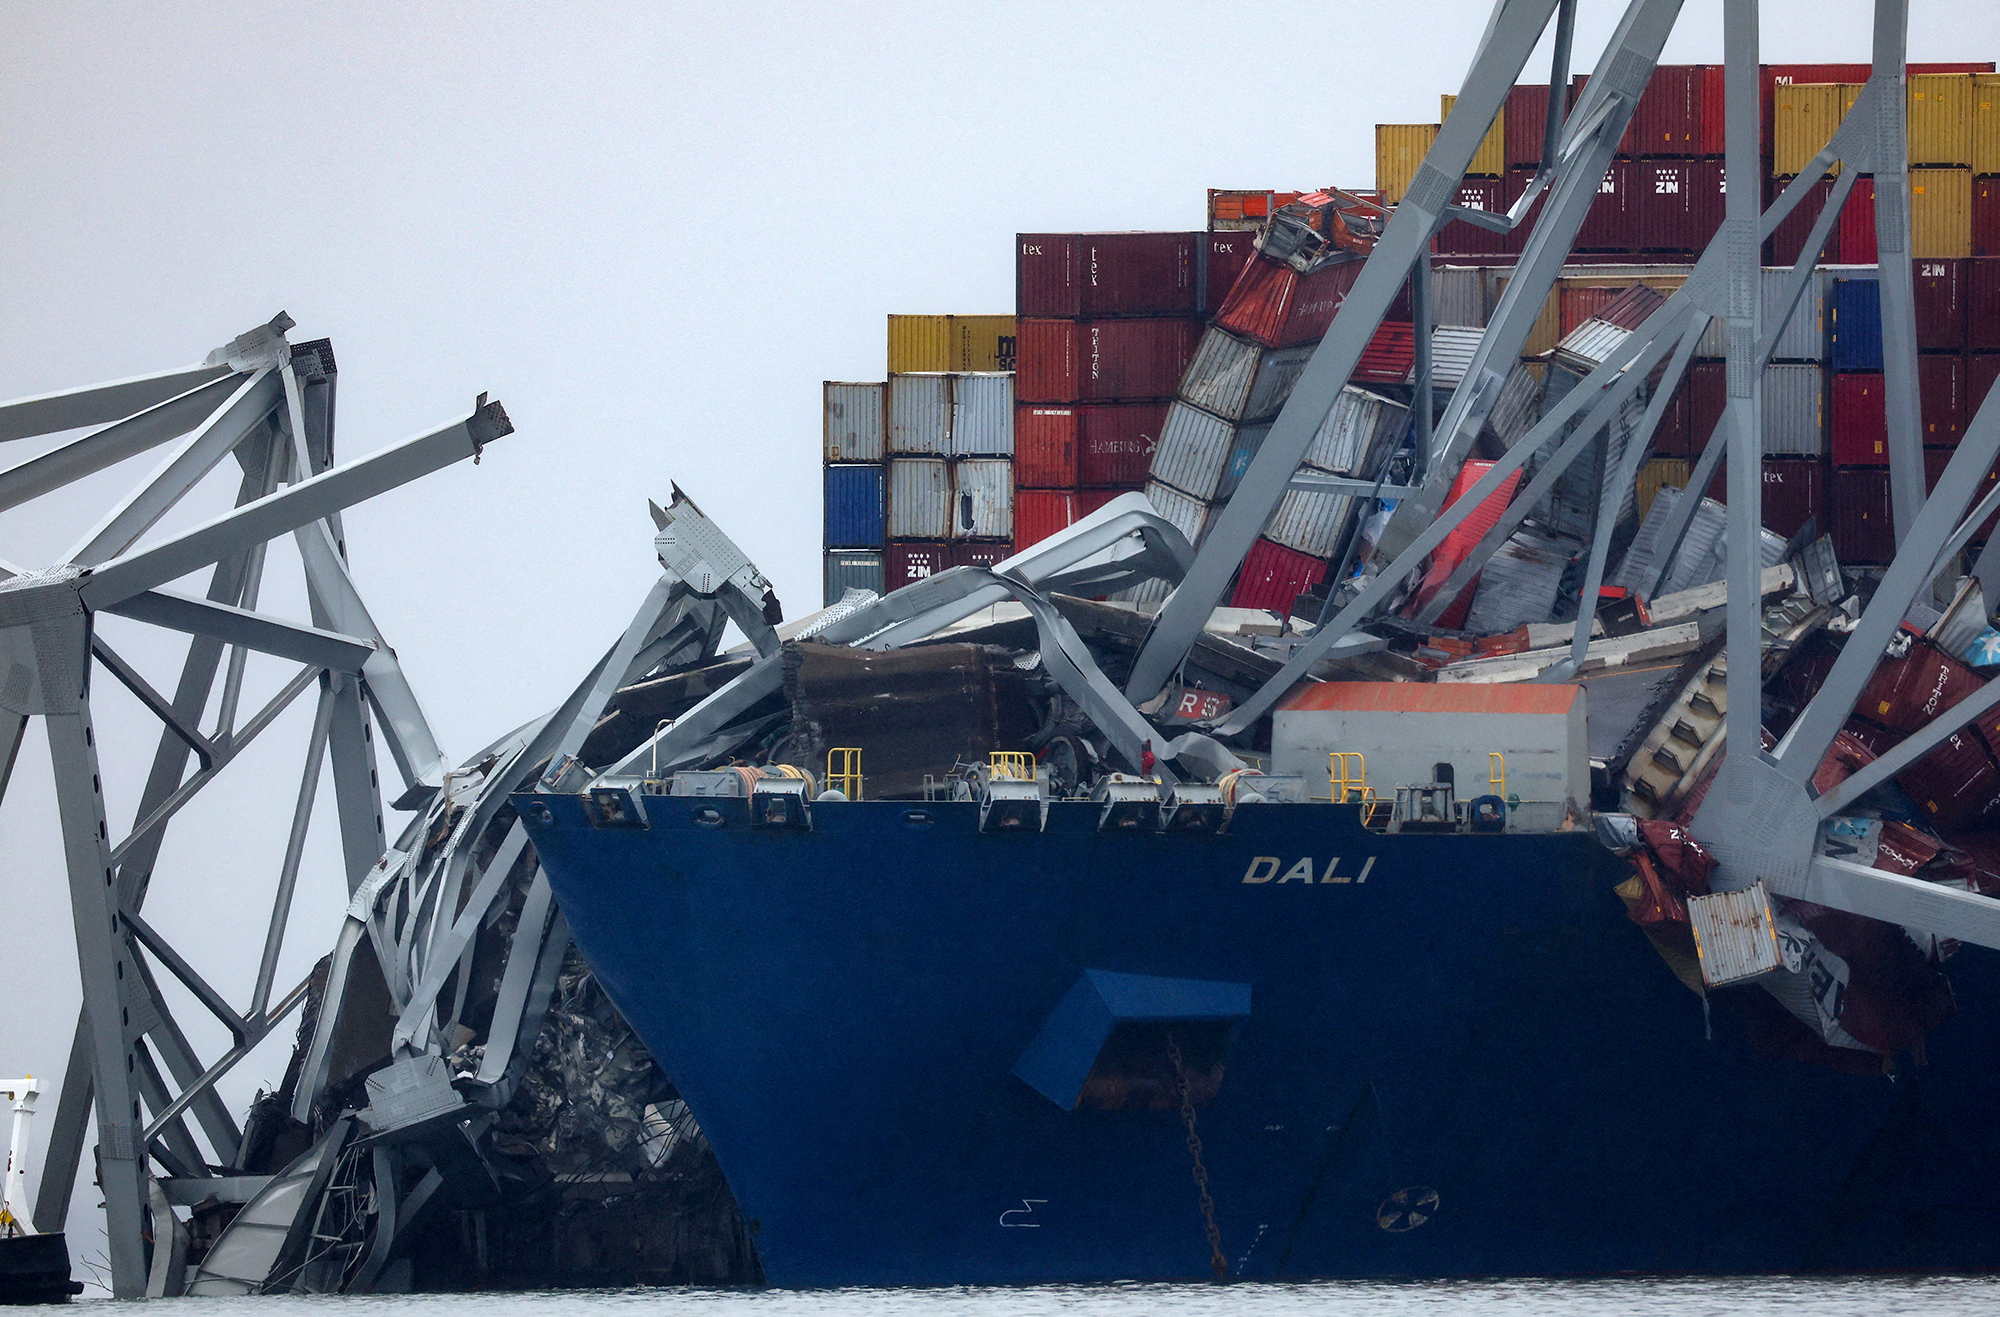 Wreckage lies across the deck of the Dali cargo vessel in Baltimore, Maryland, on March 27. 